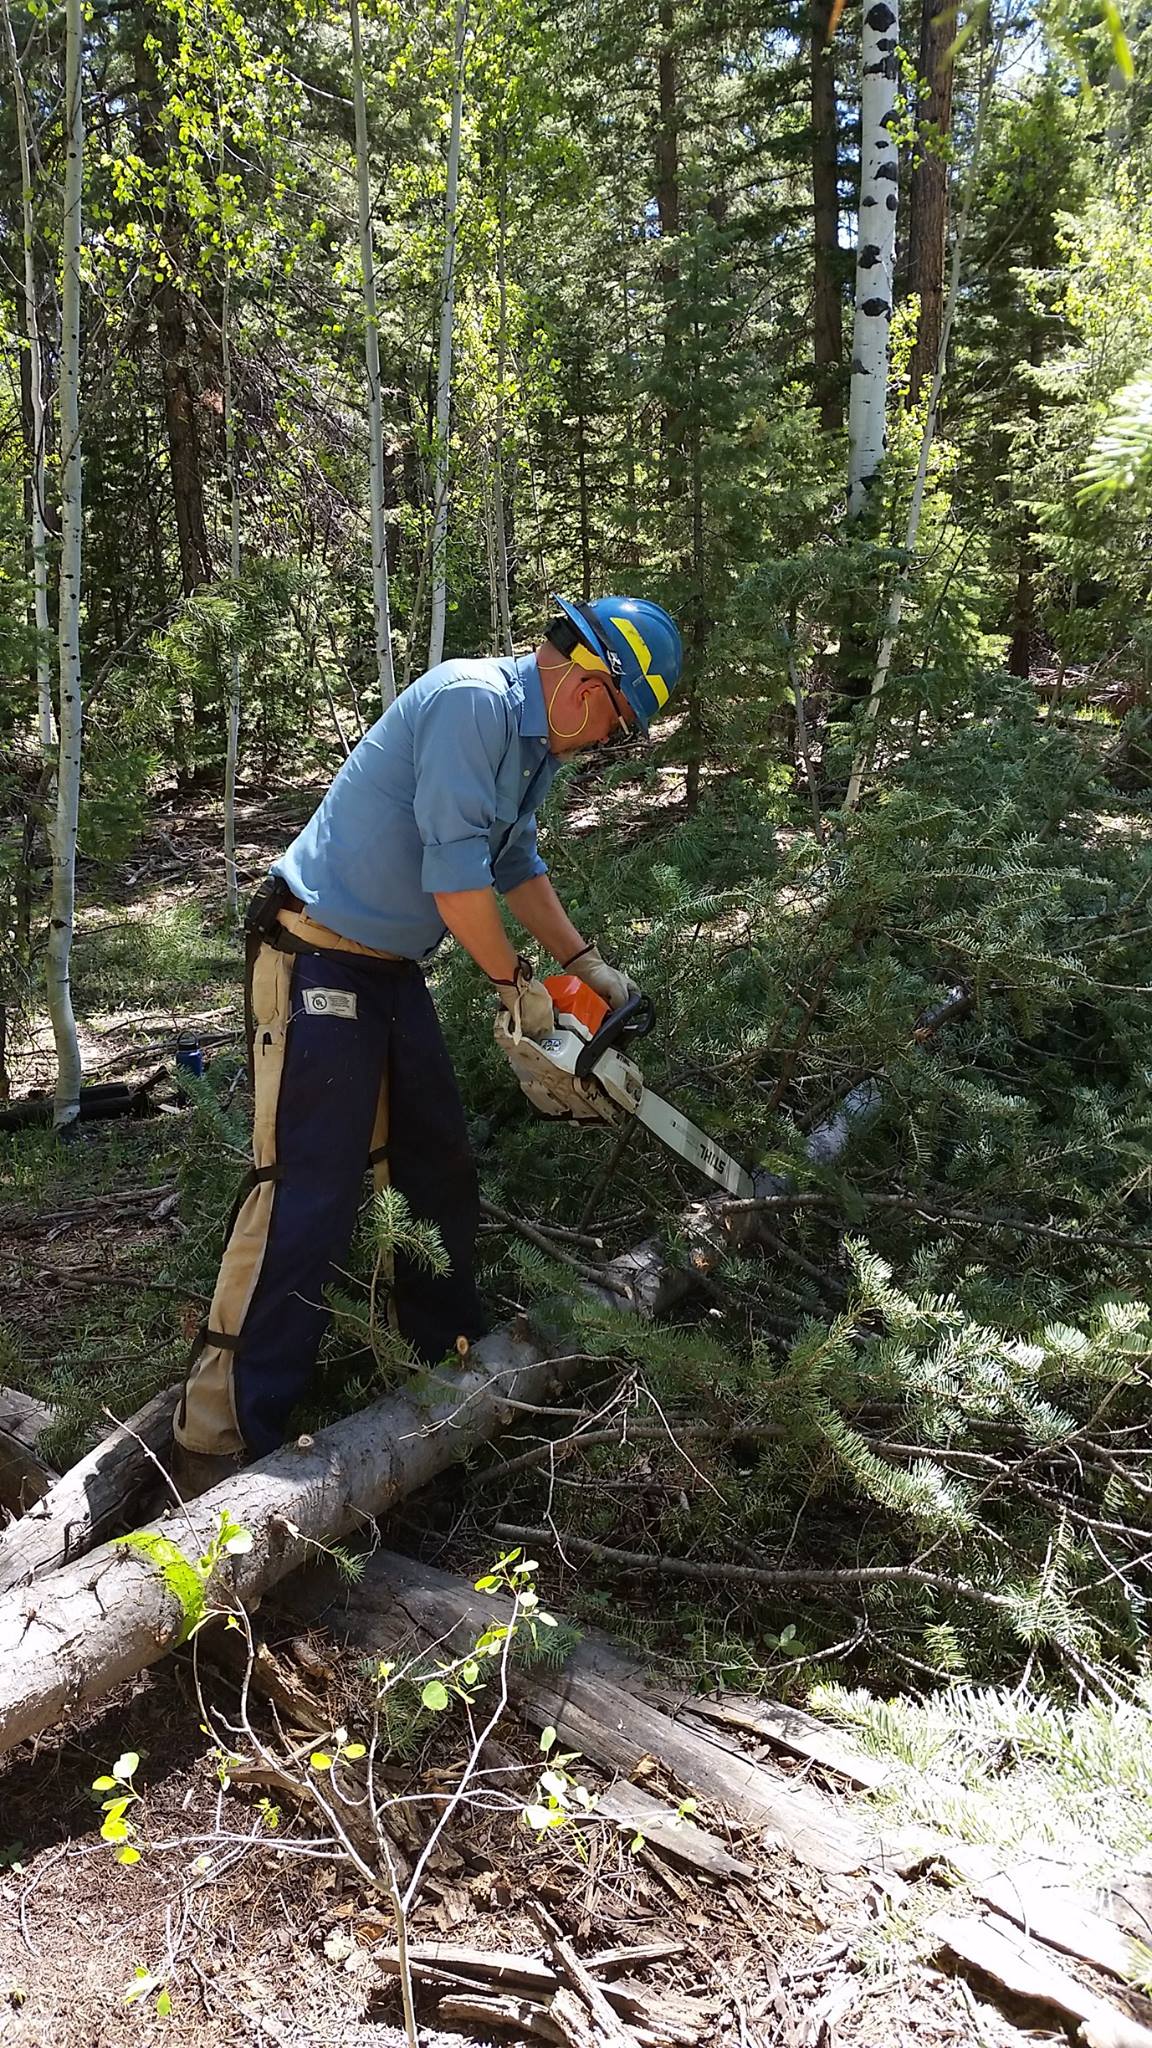 Andrew Sanchez Meador uses a chainsaw on a tree.